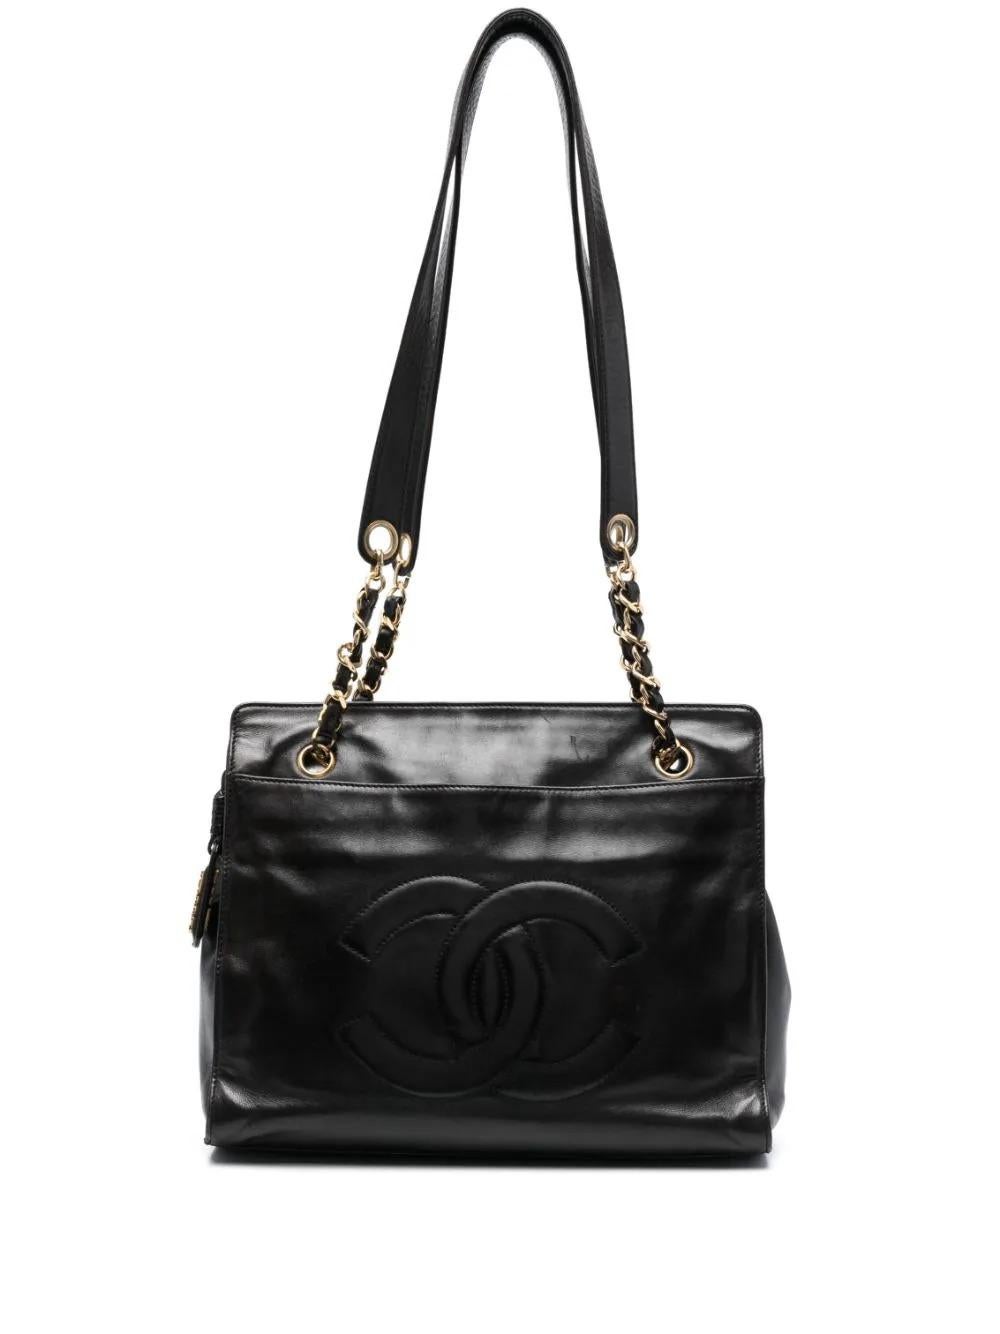 1994-1995 Chanel Black Chocolate Leather Shopping Tote Bag For Sale 3